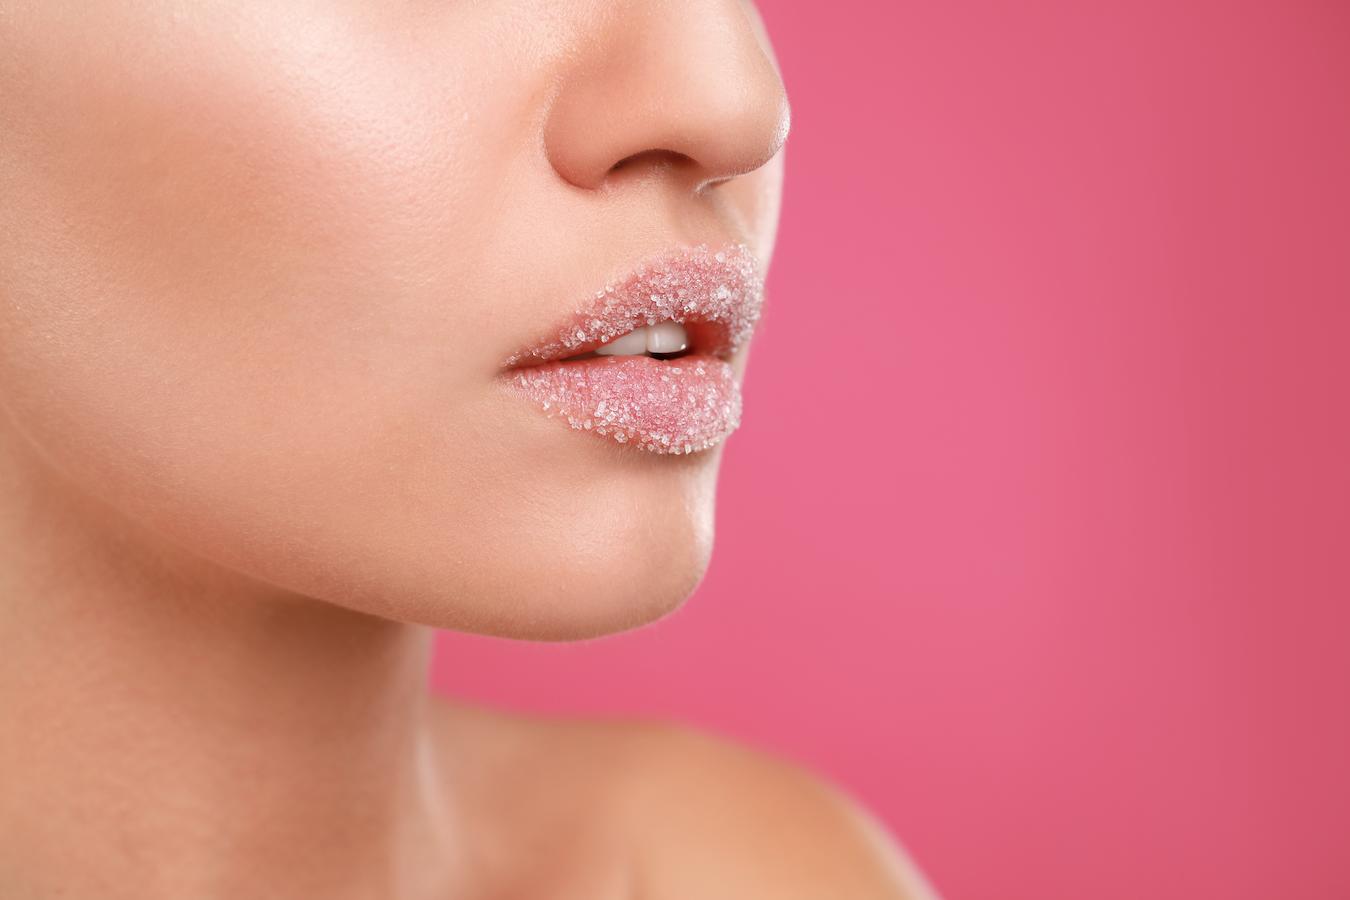 Gentle exfoliation should be a part of your skincare routine for plumper lips